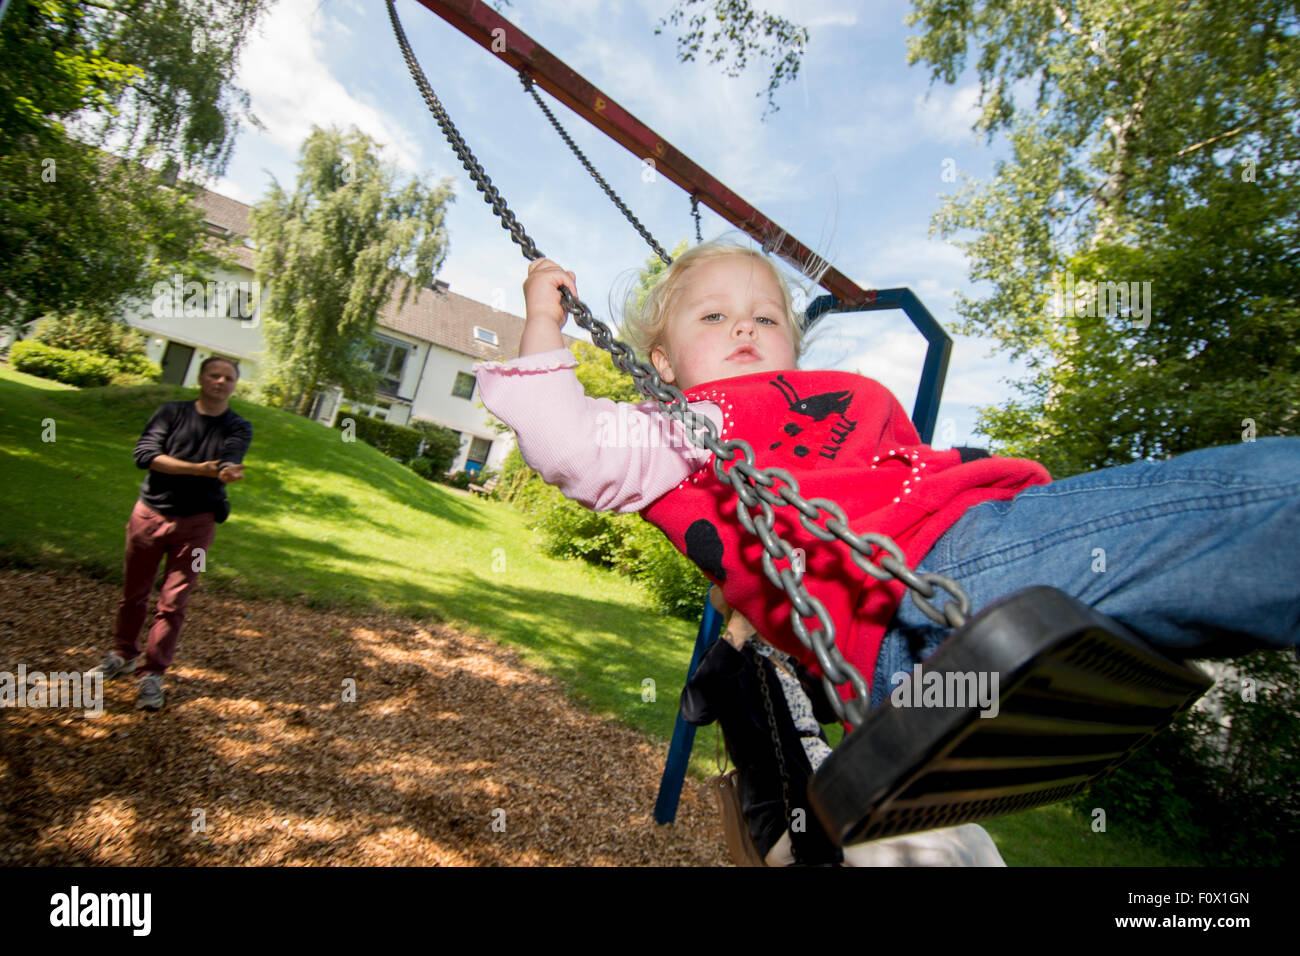 Little girl on swing with Dad in background. Stock Photo